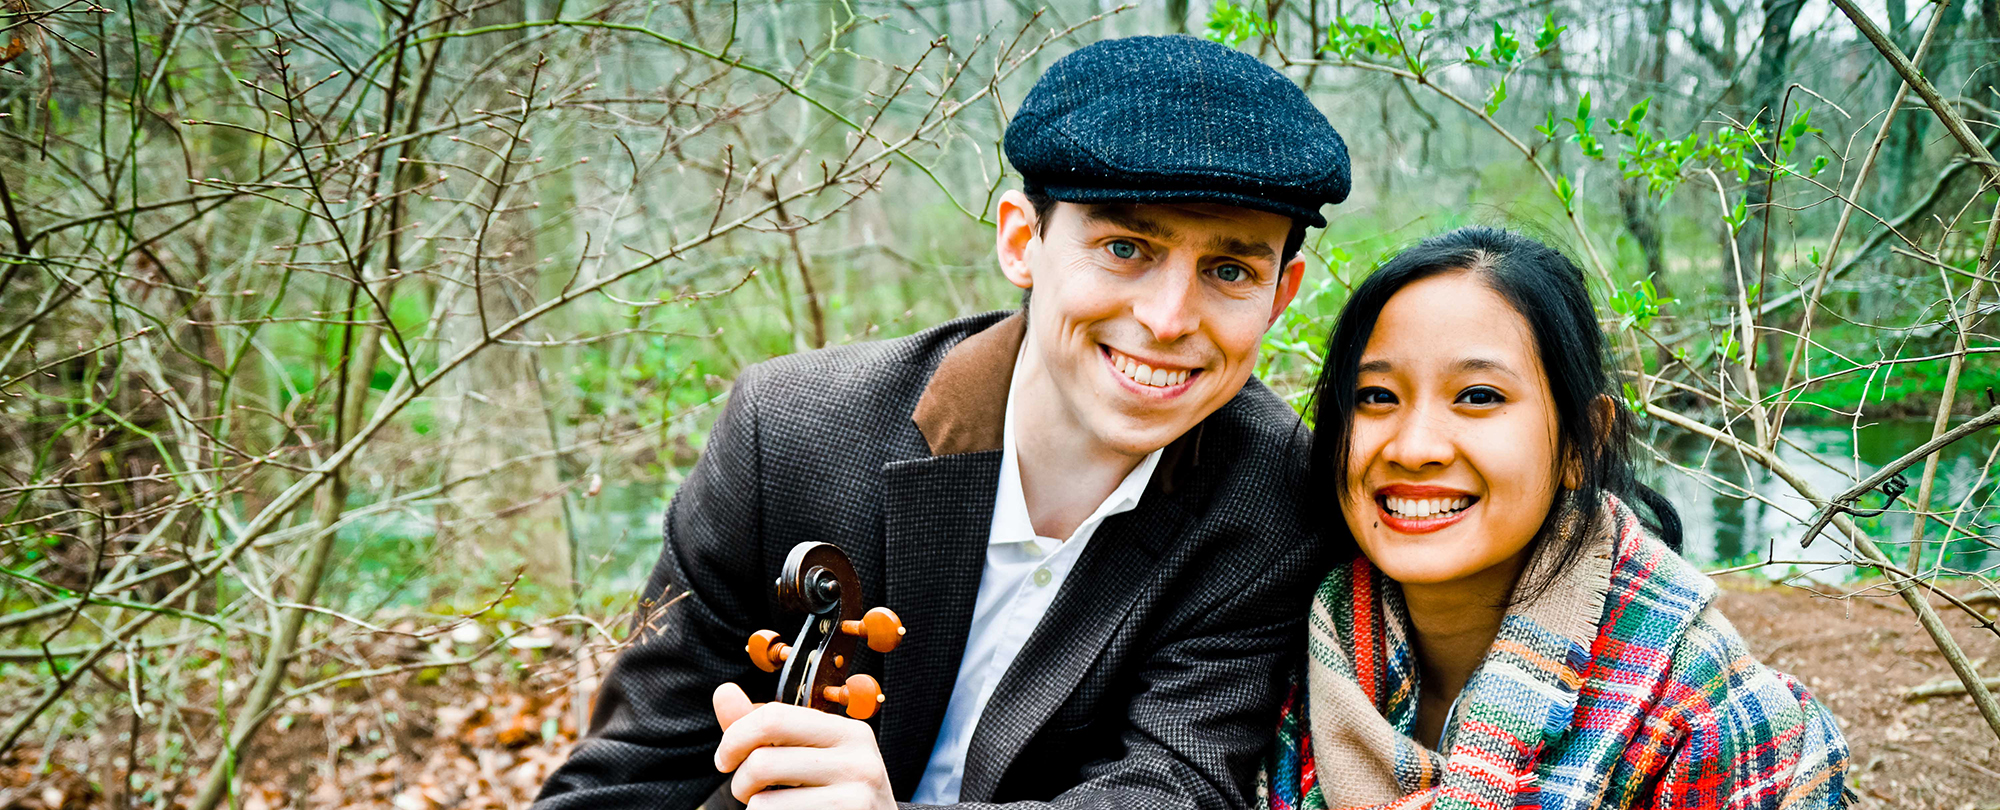 Highlands Duo to perform Baroque period pieces at Ouachita Oct. 25.